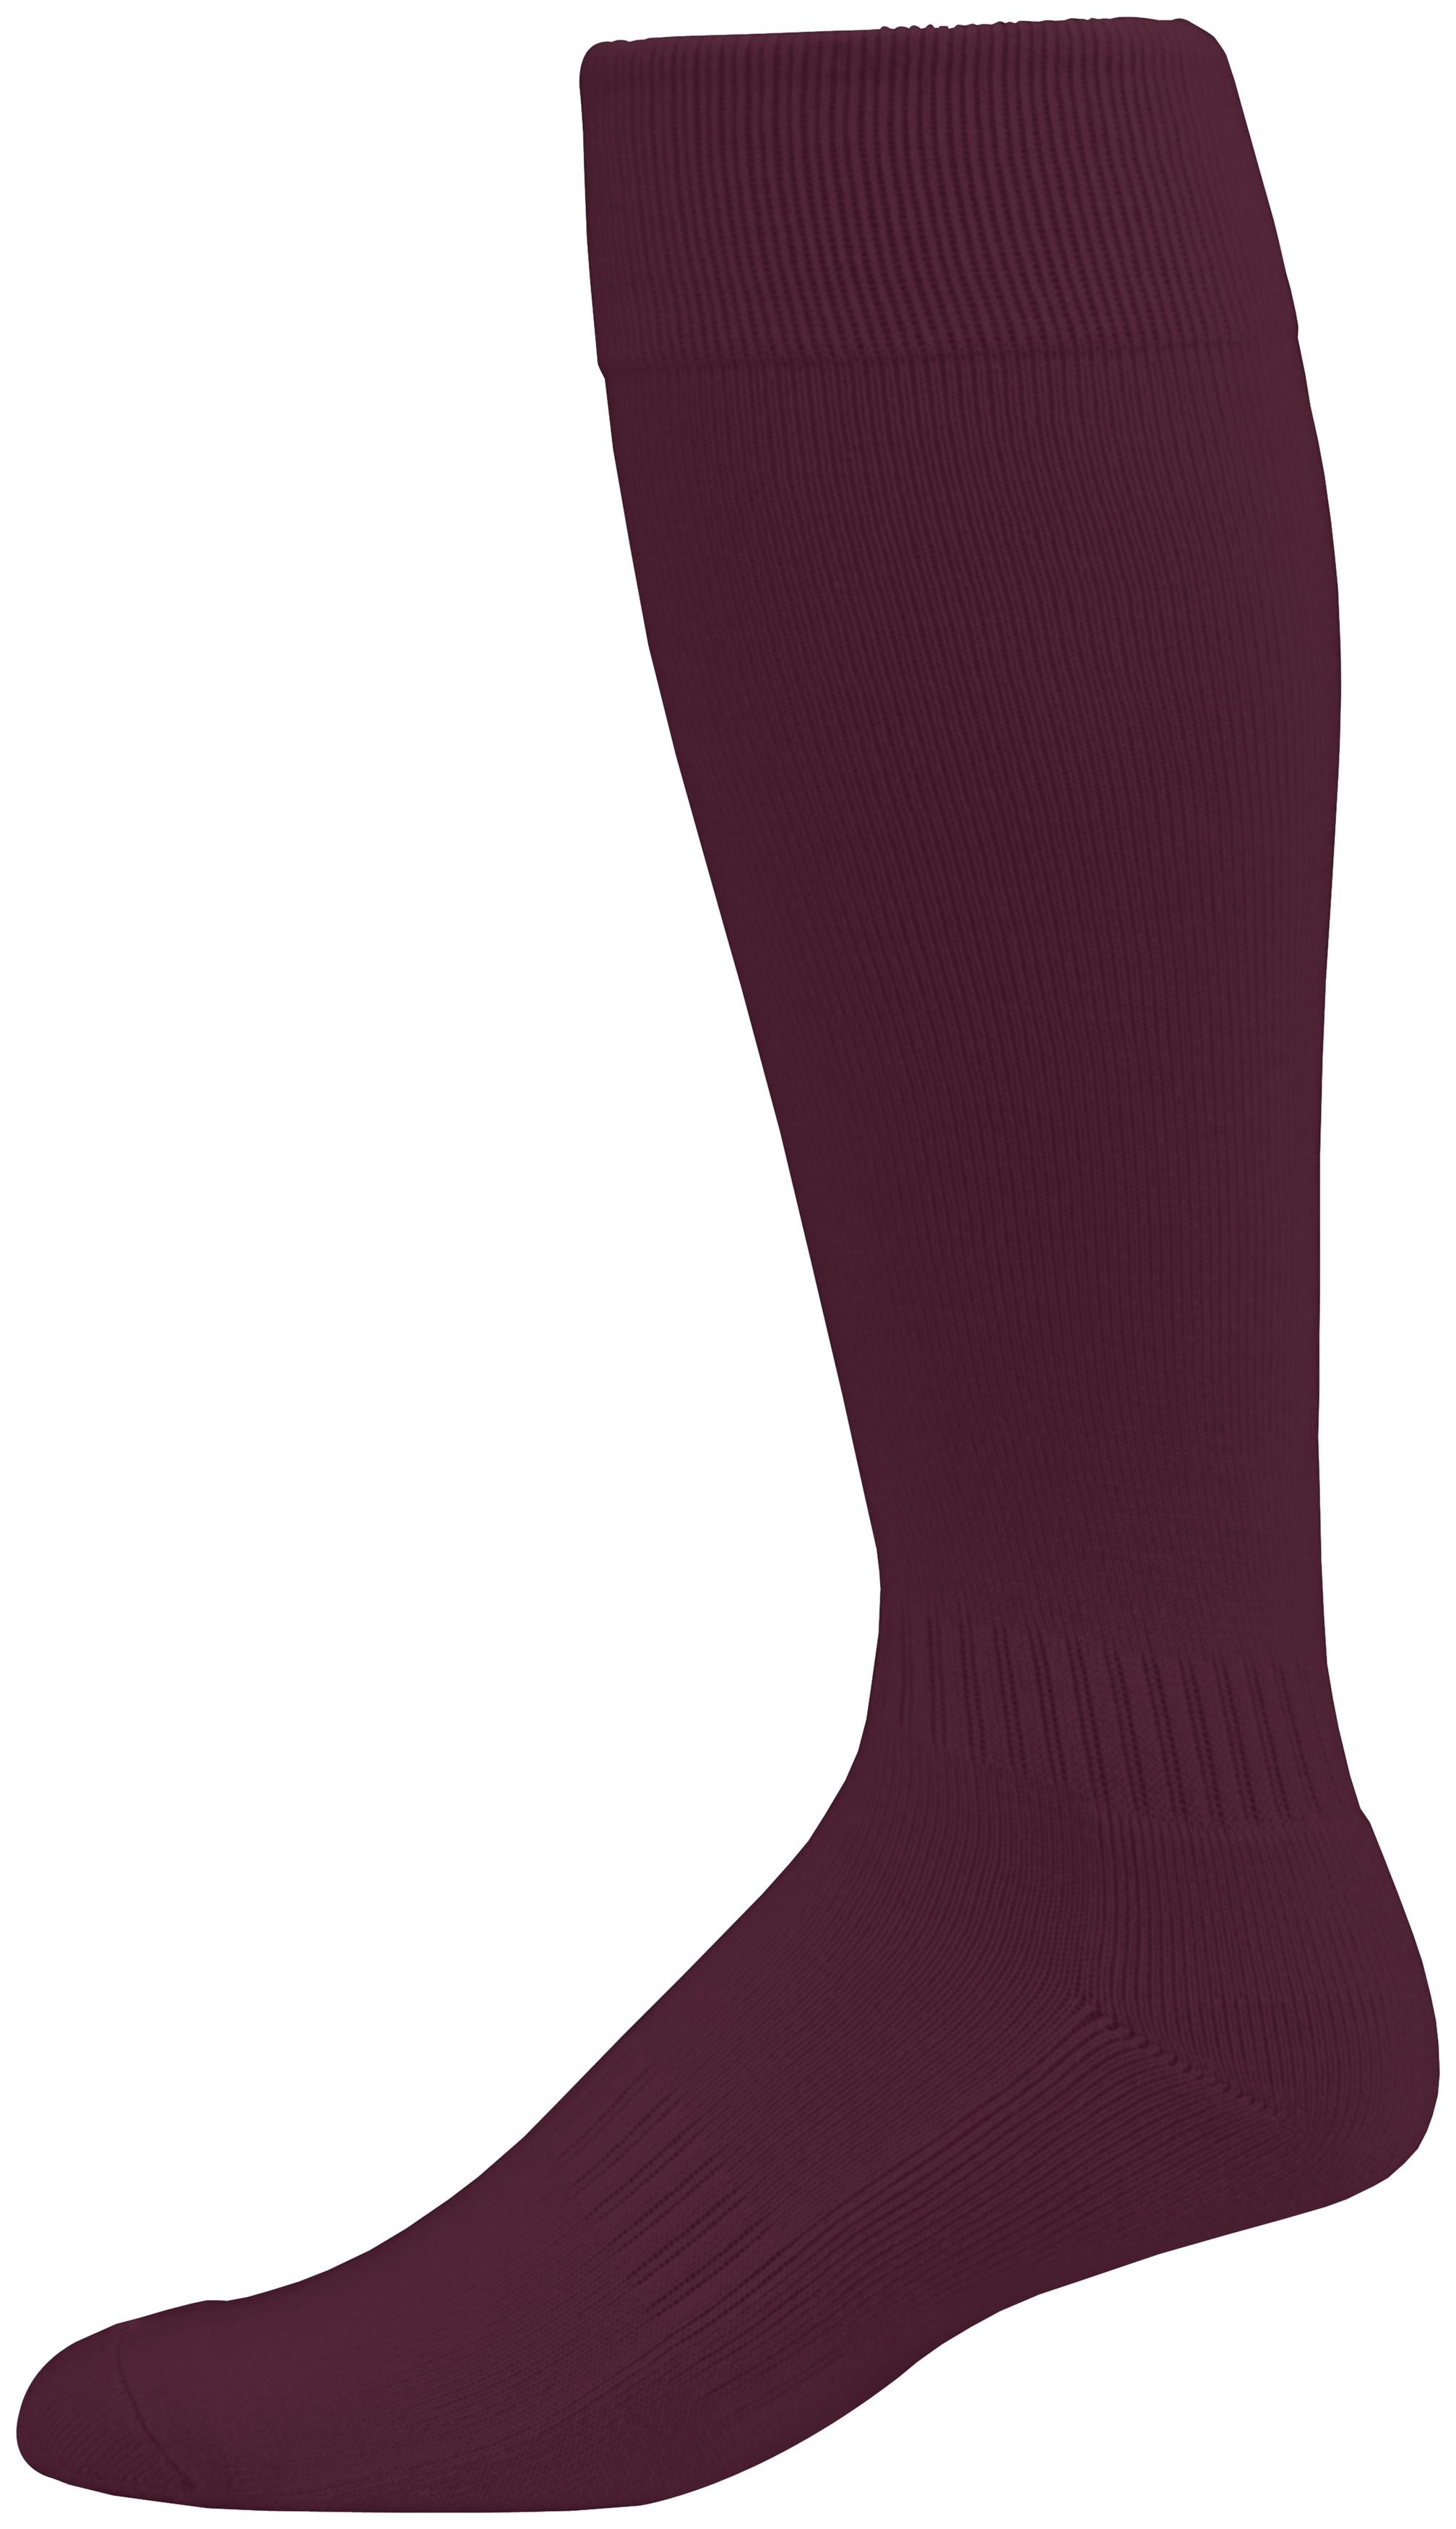 Augusta Sportswear Elite Multi-Sport Sock in Maroon (Hlw)  -Part of the Accessories, Augusta-Products, Accessories-Socks product lines at KanaleyCreations.com